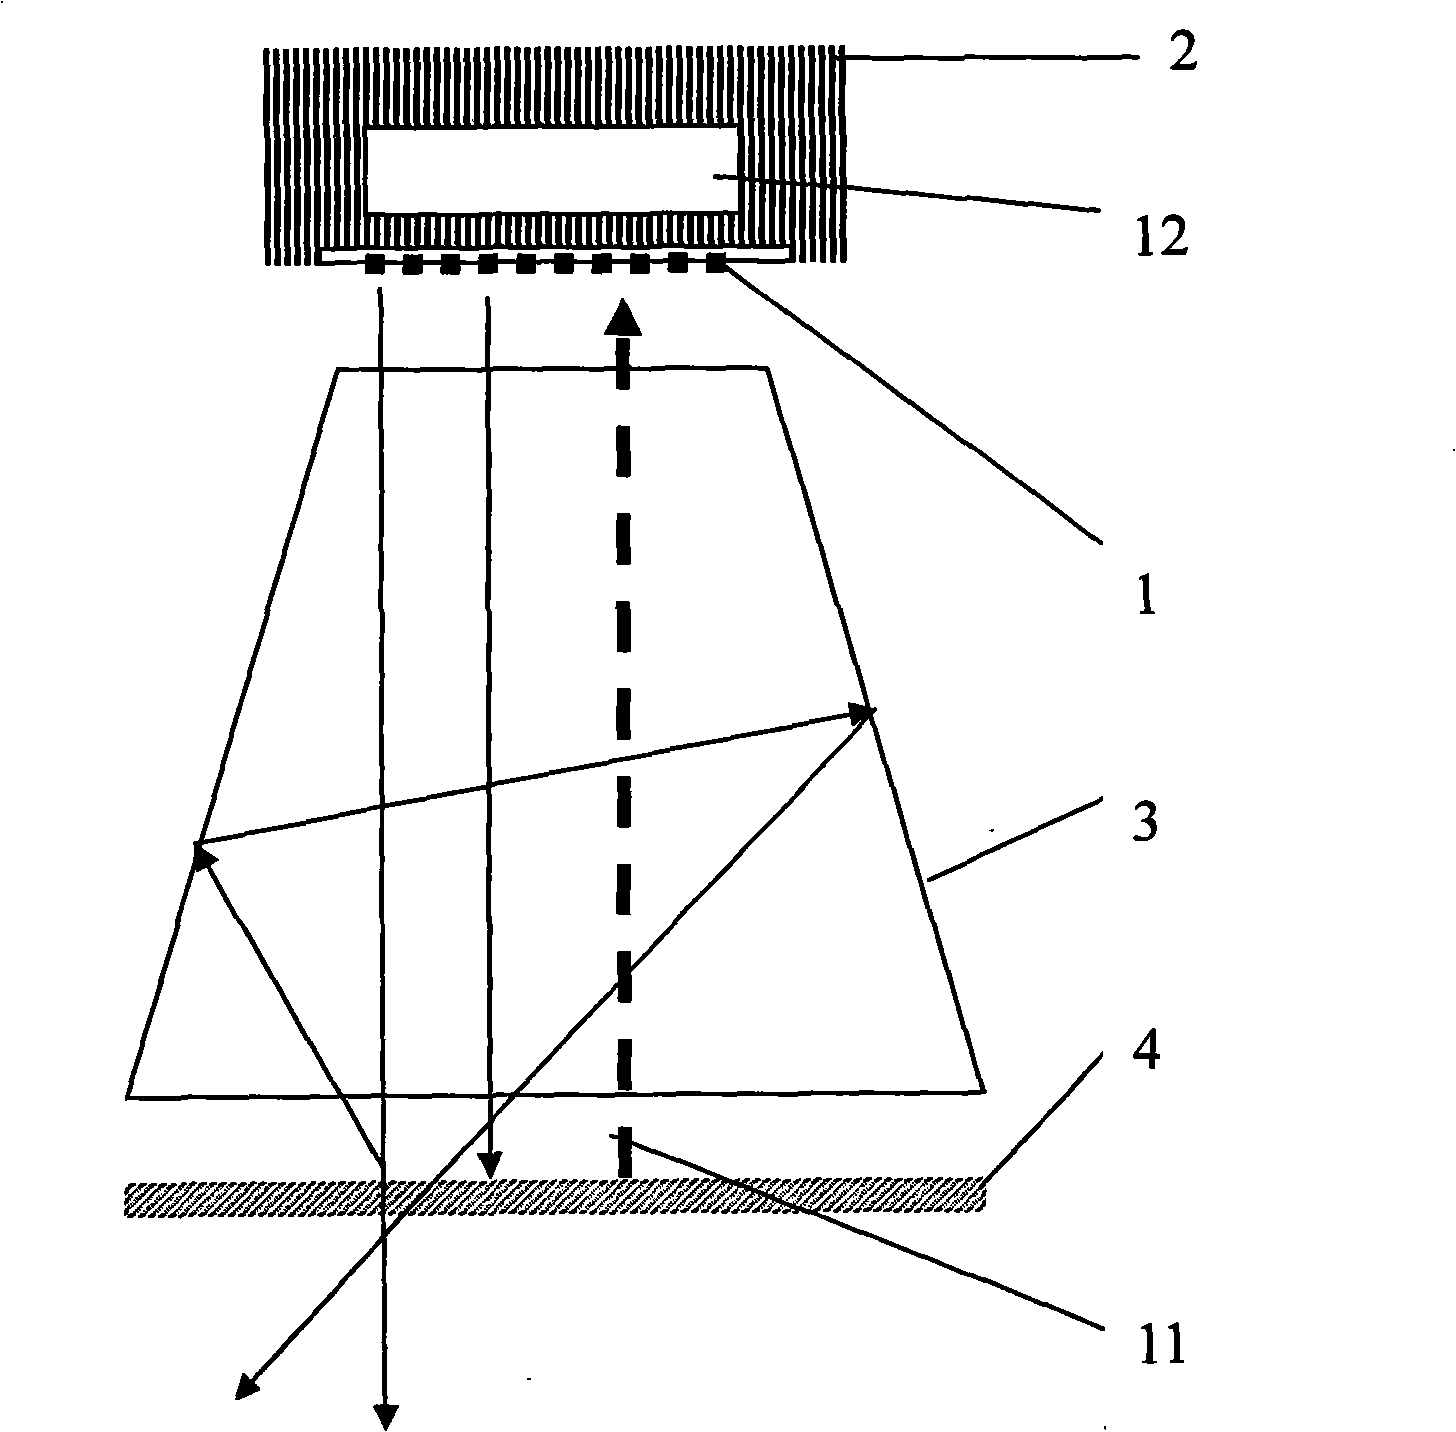 Light and color controllable illumination device and method using automatic white balance for regulation and control